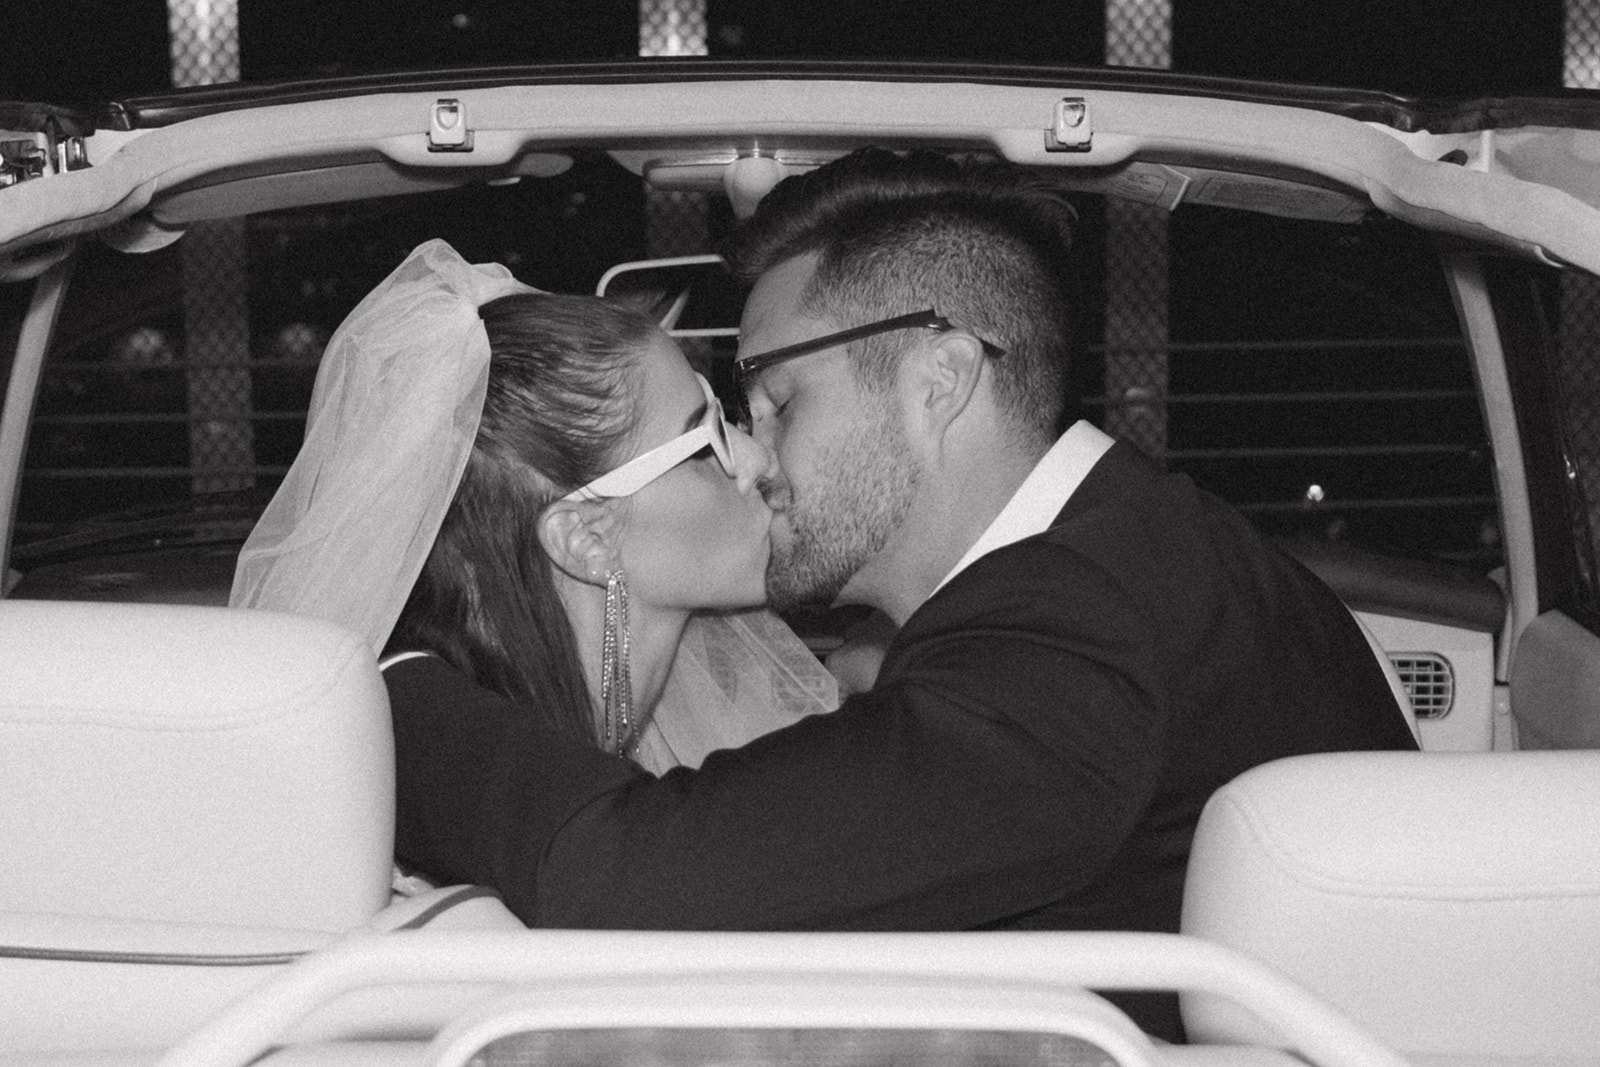 wedding kiss, black and white photography, first kiss